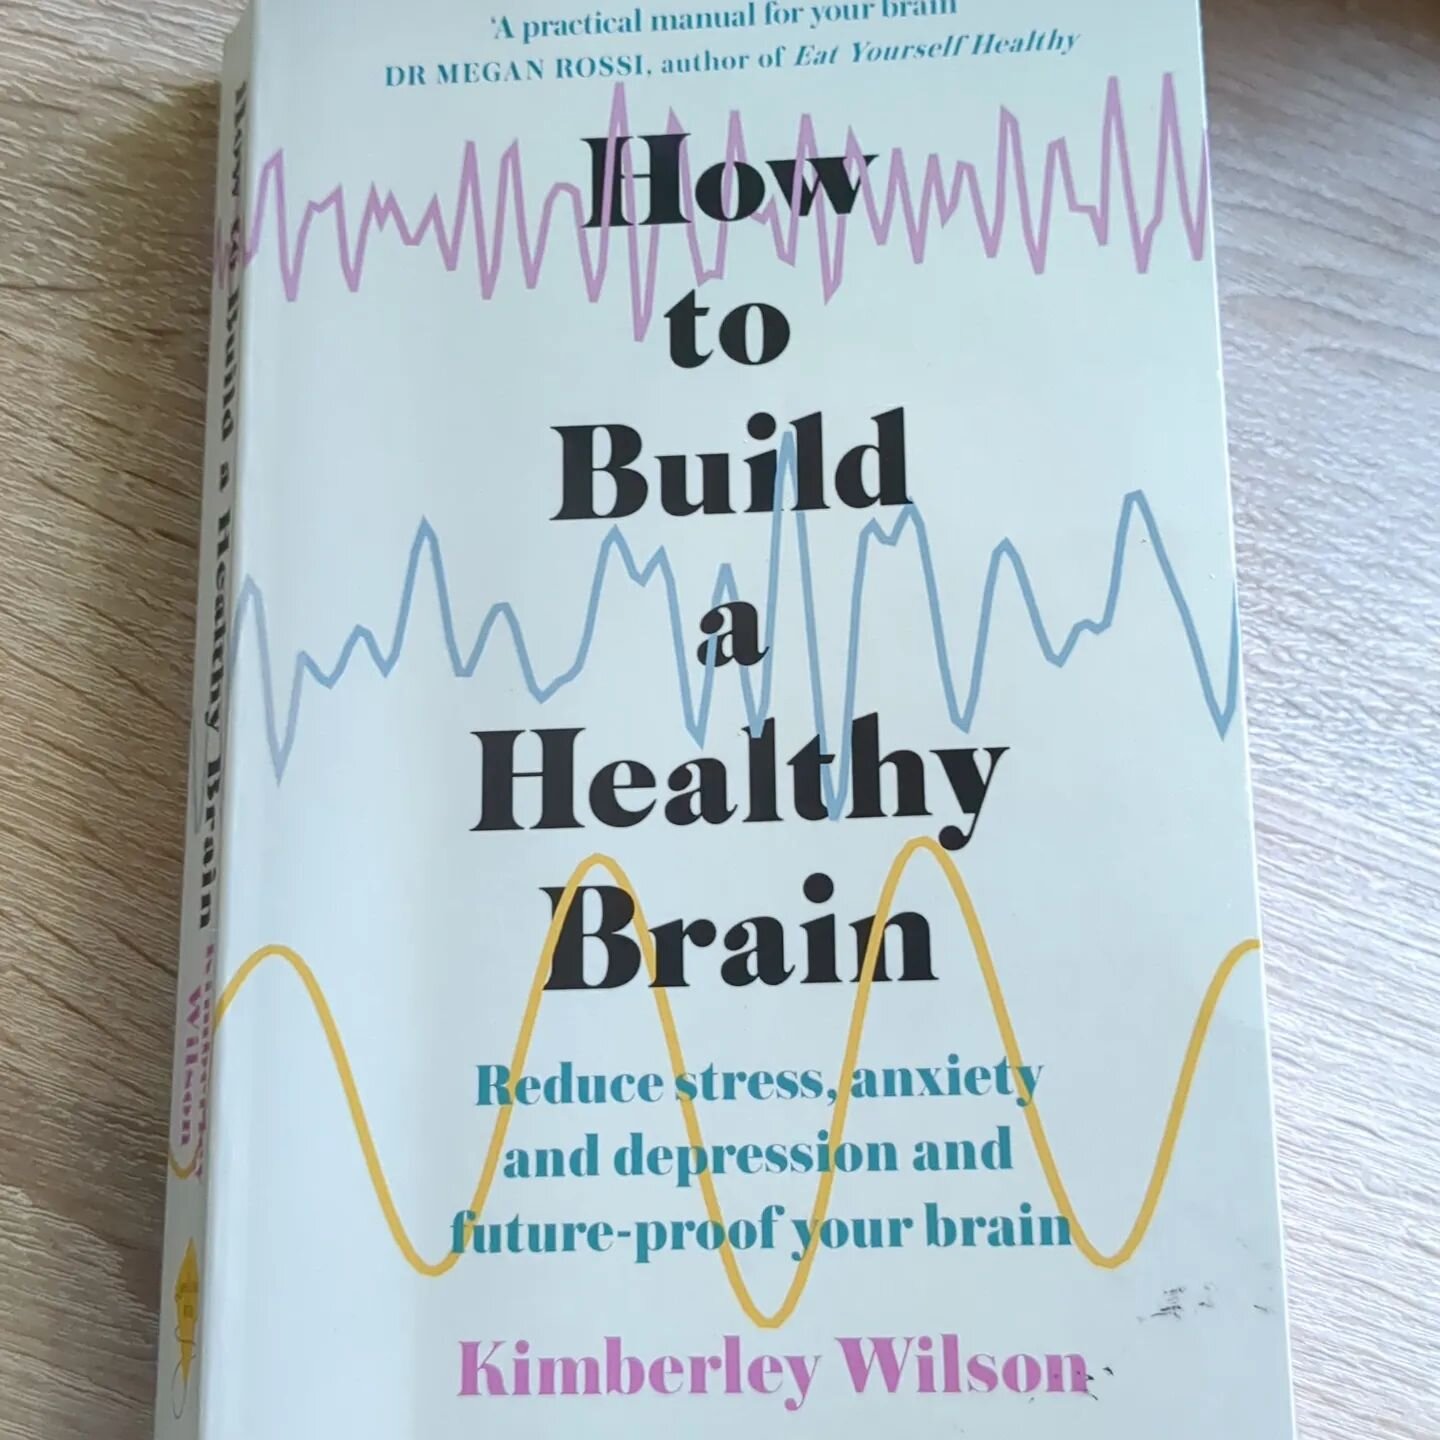 Some useful tips in here, from managing emotions and difficult relationships to exercise and nutrition. 

#howtobuildahealthybrain #mentalhealth #mentalhealthbooks #emotions #holistic #tips #brainhealth #lookafteryourself #selfhelp